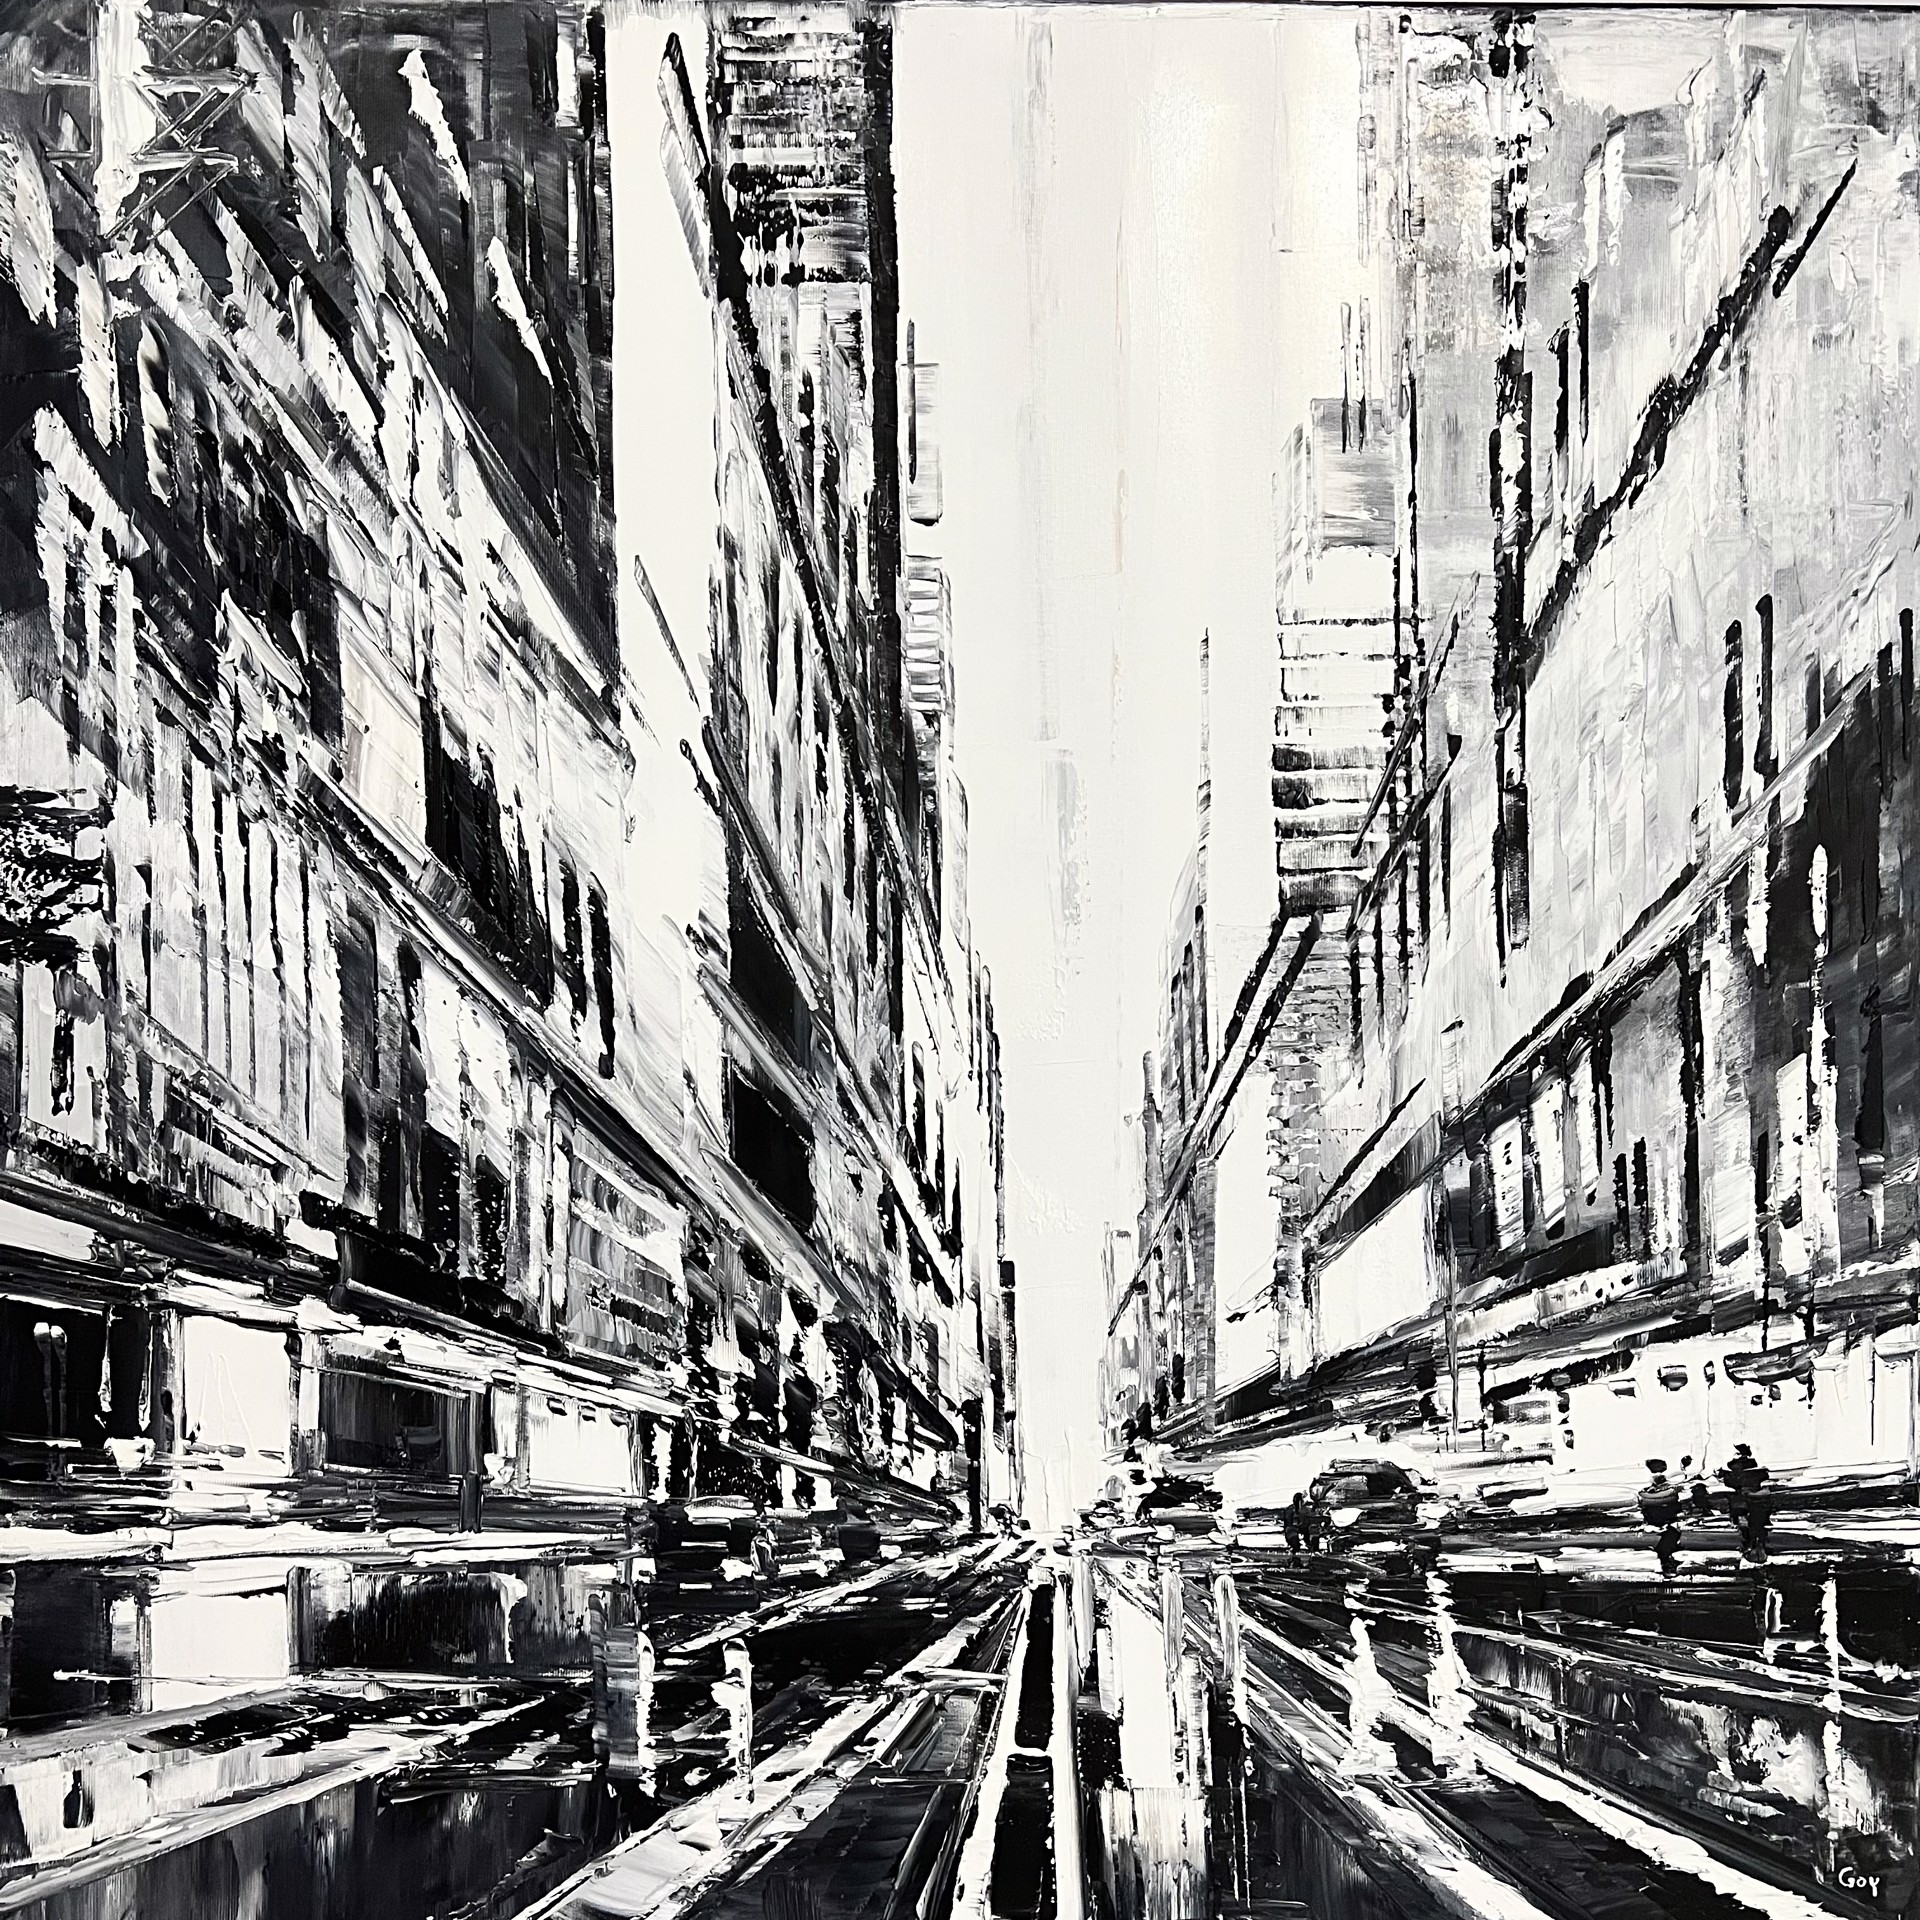 Black and White City by Gregory Goy